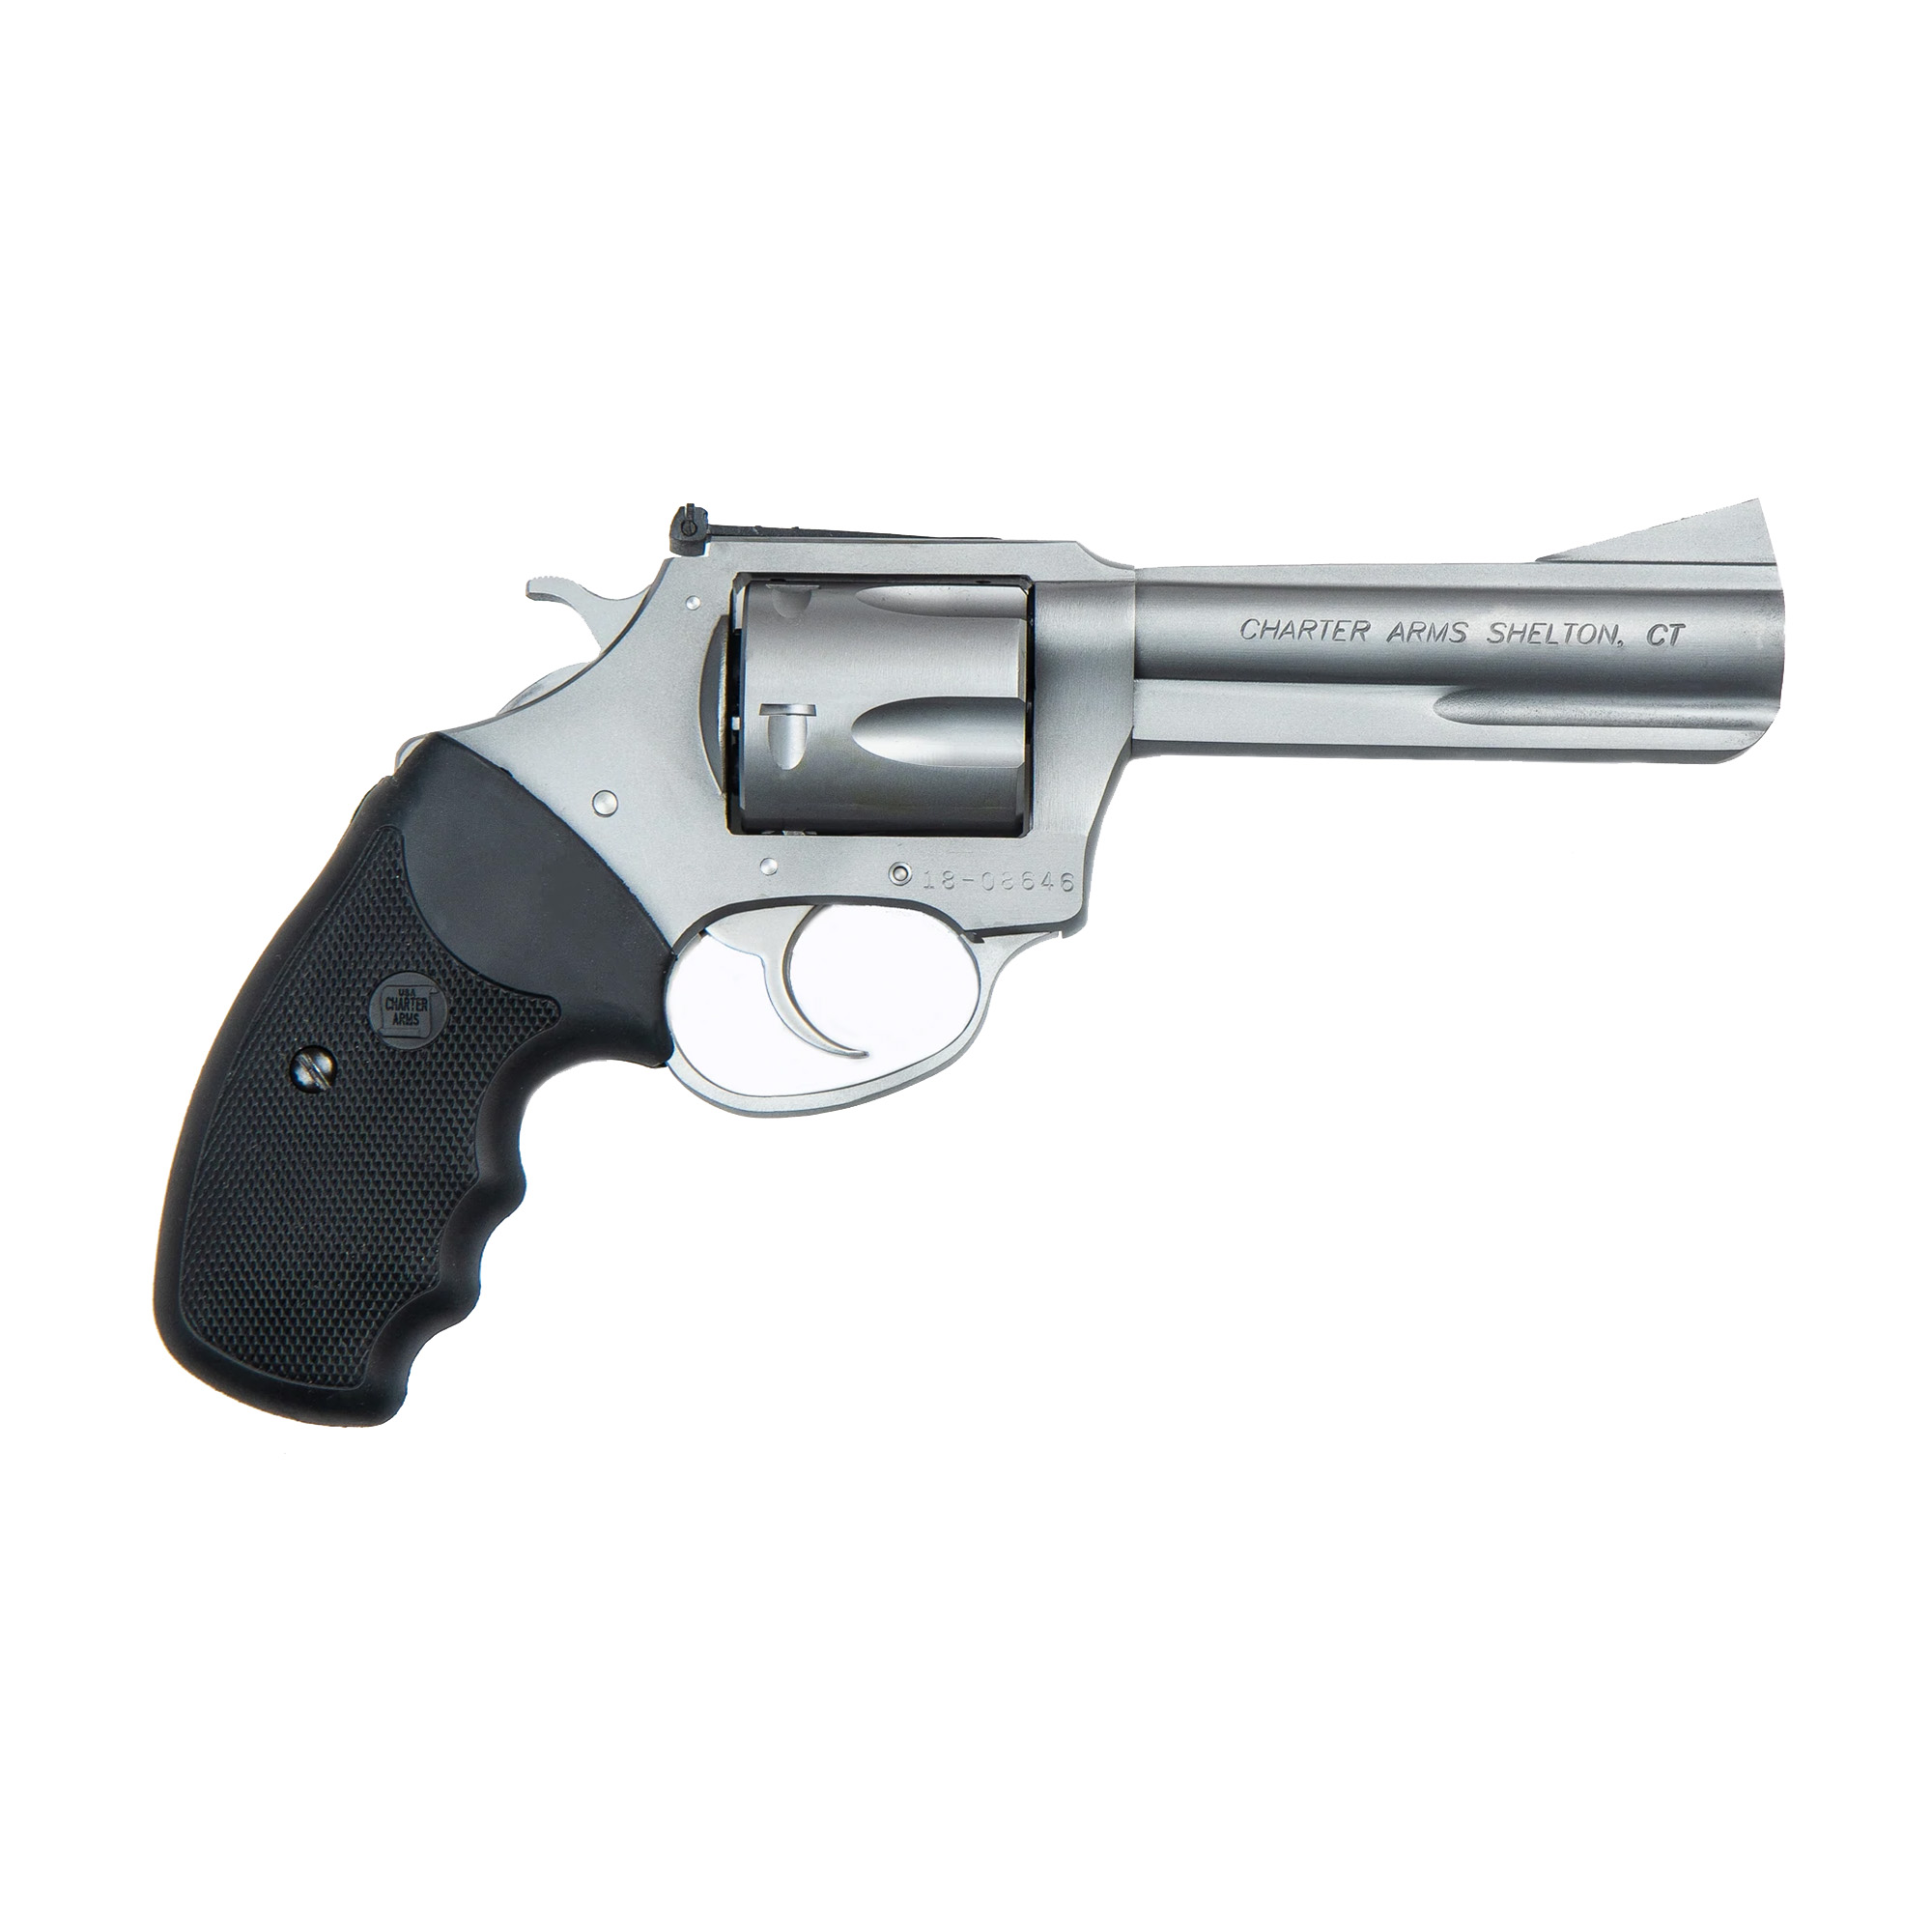 Charter Arms, Bulldog, Revolver, 44 Special, 4.2" Barrel, Steel, Stainless Finish, Rubber Grips, Fixed Sights, 5 Rounds